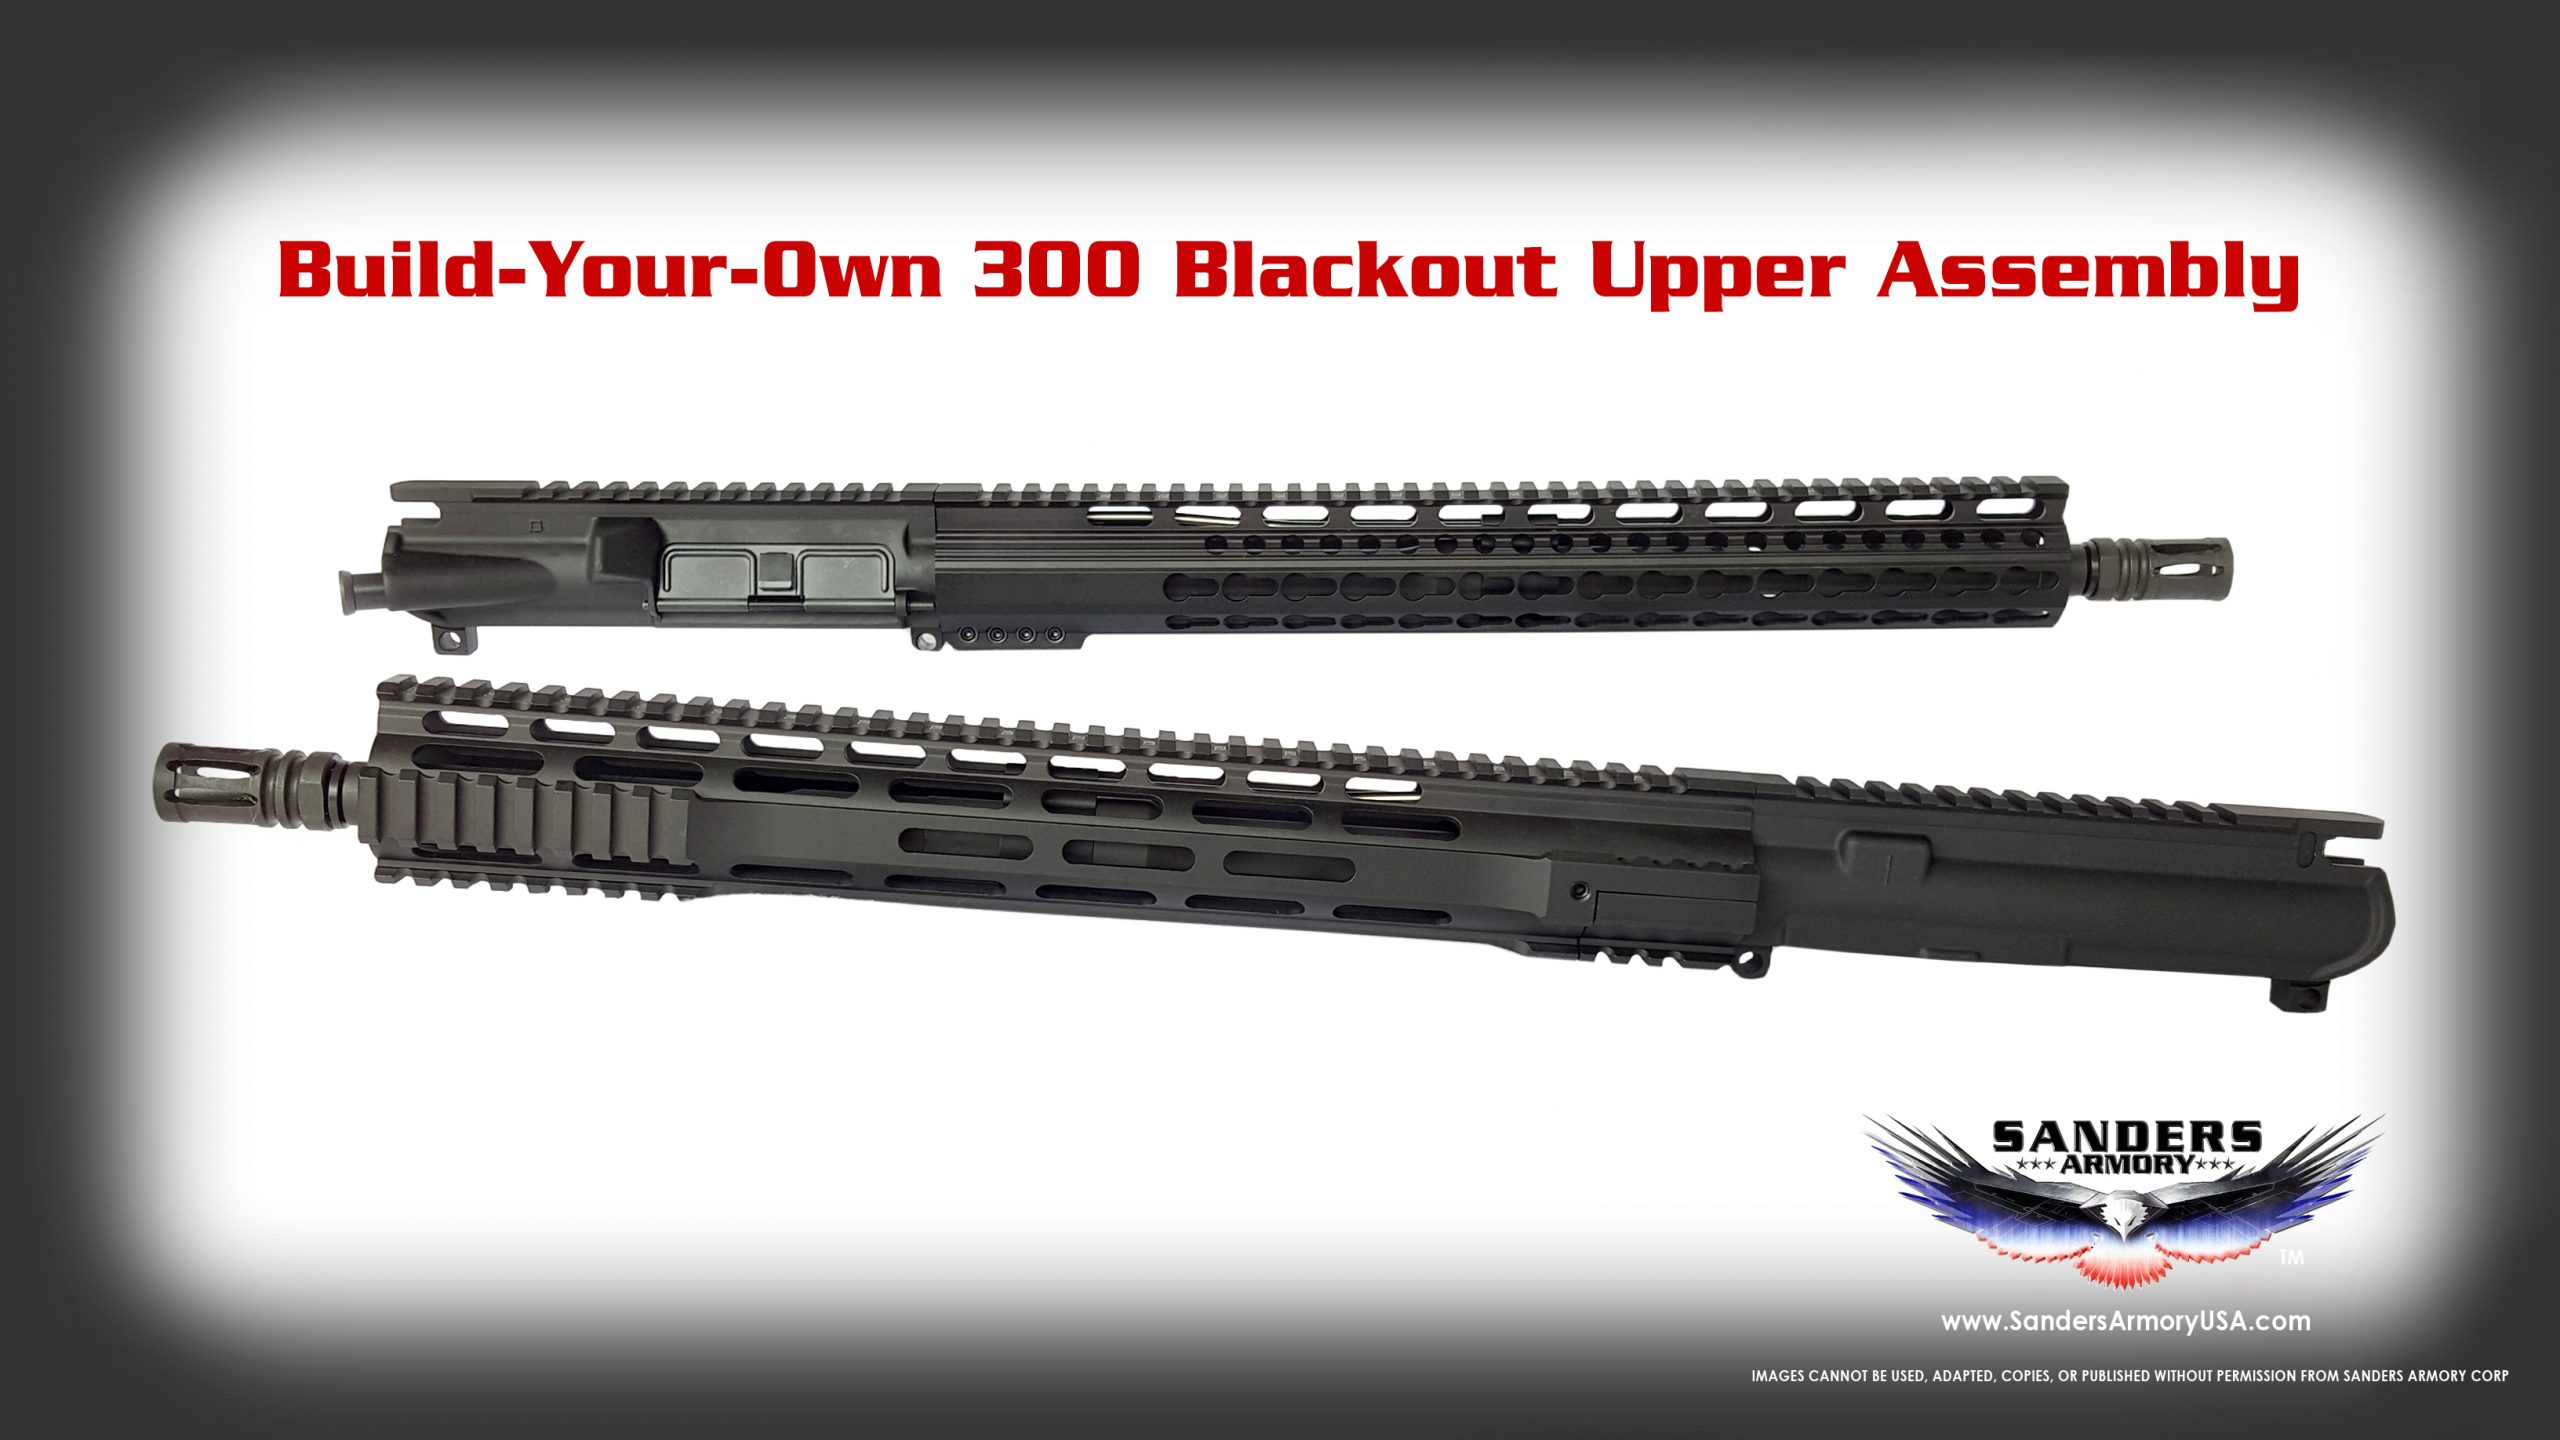 Build Your Own 300 Blackout Upper Assembly.